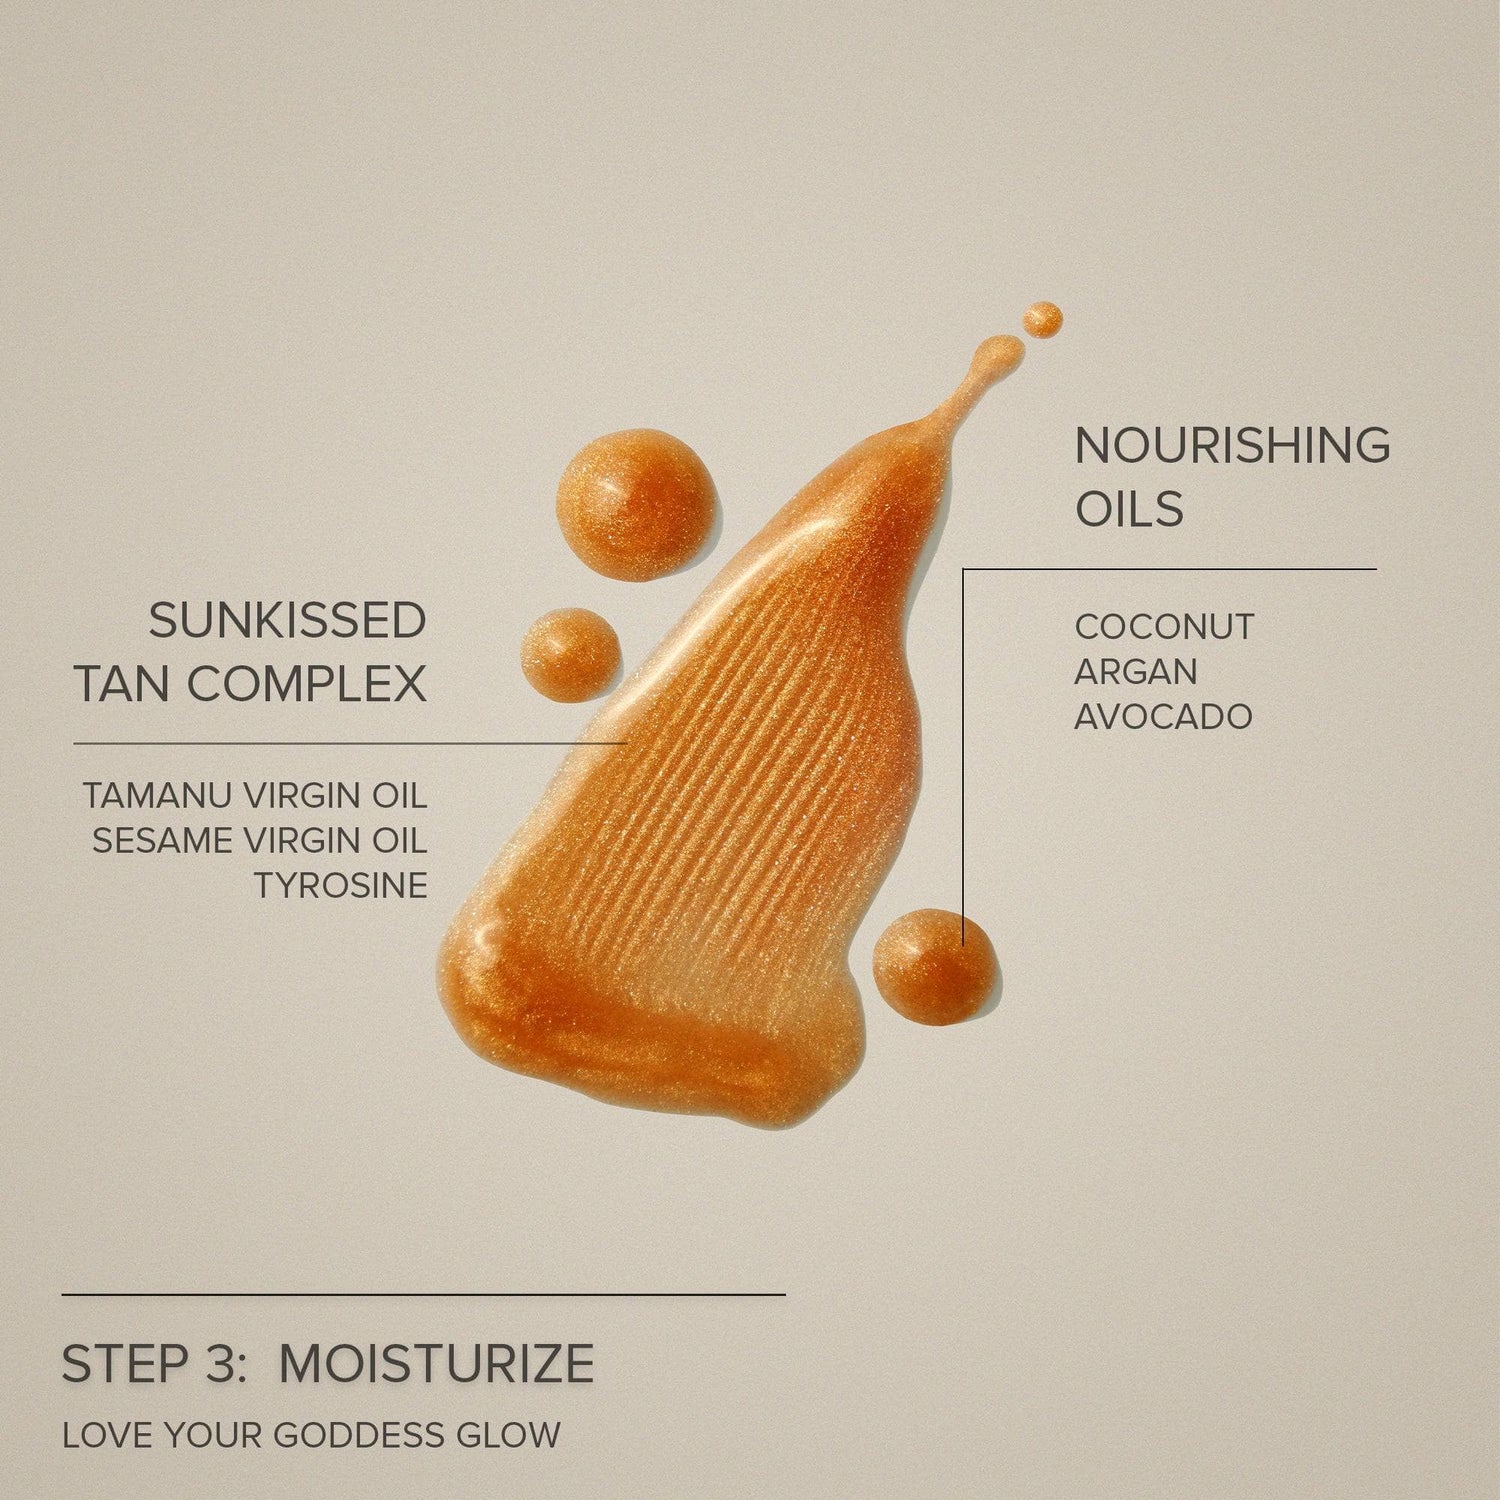 Oils included in the ingredients of Sunshine Oil Body Elixir